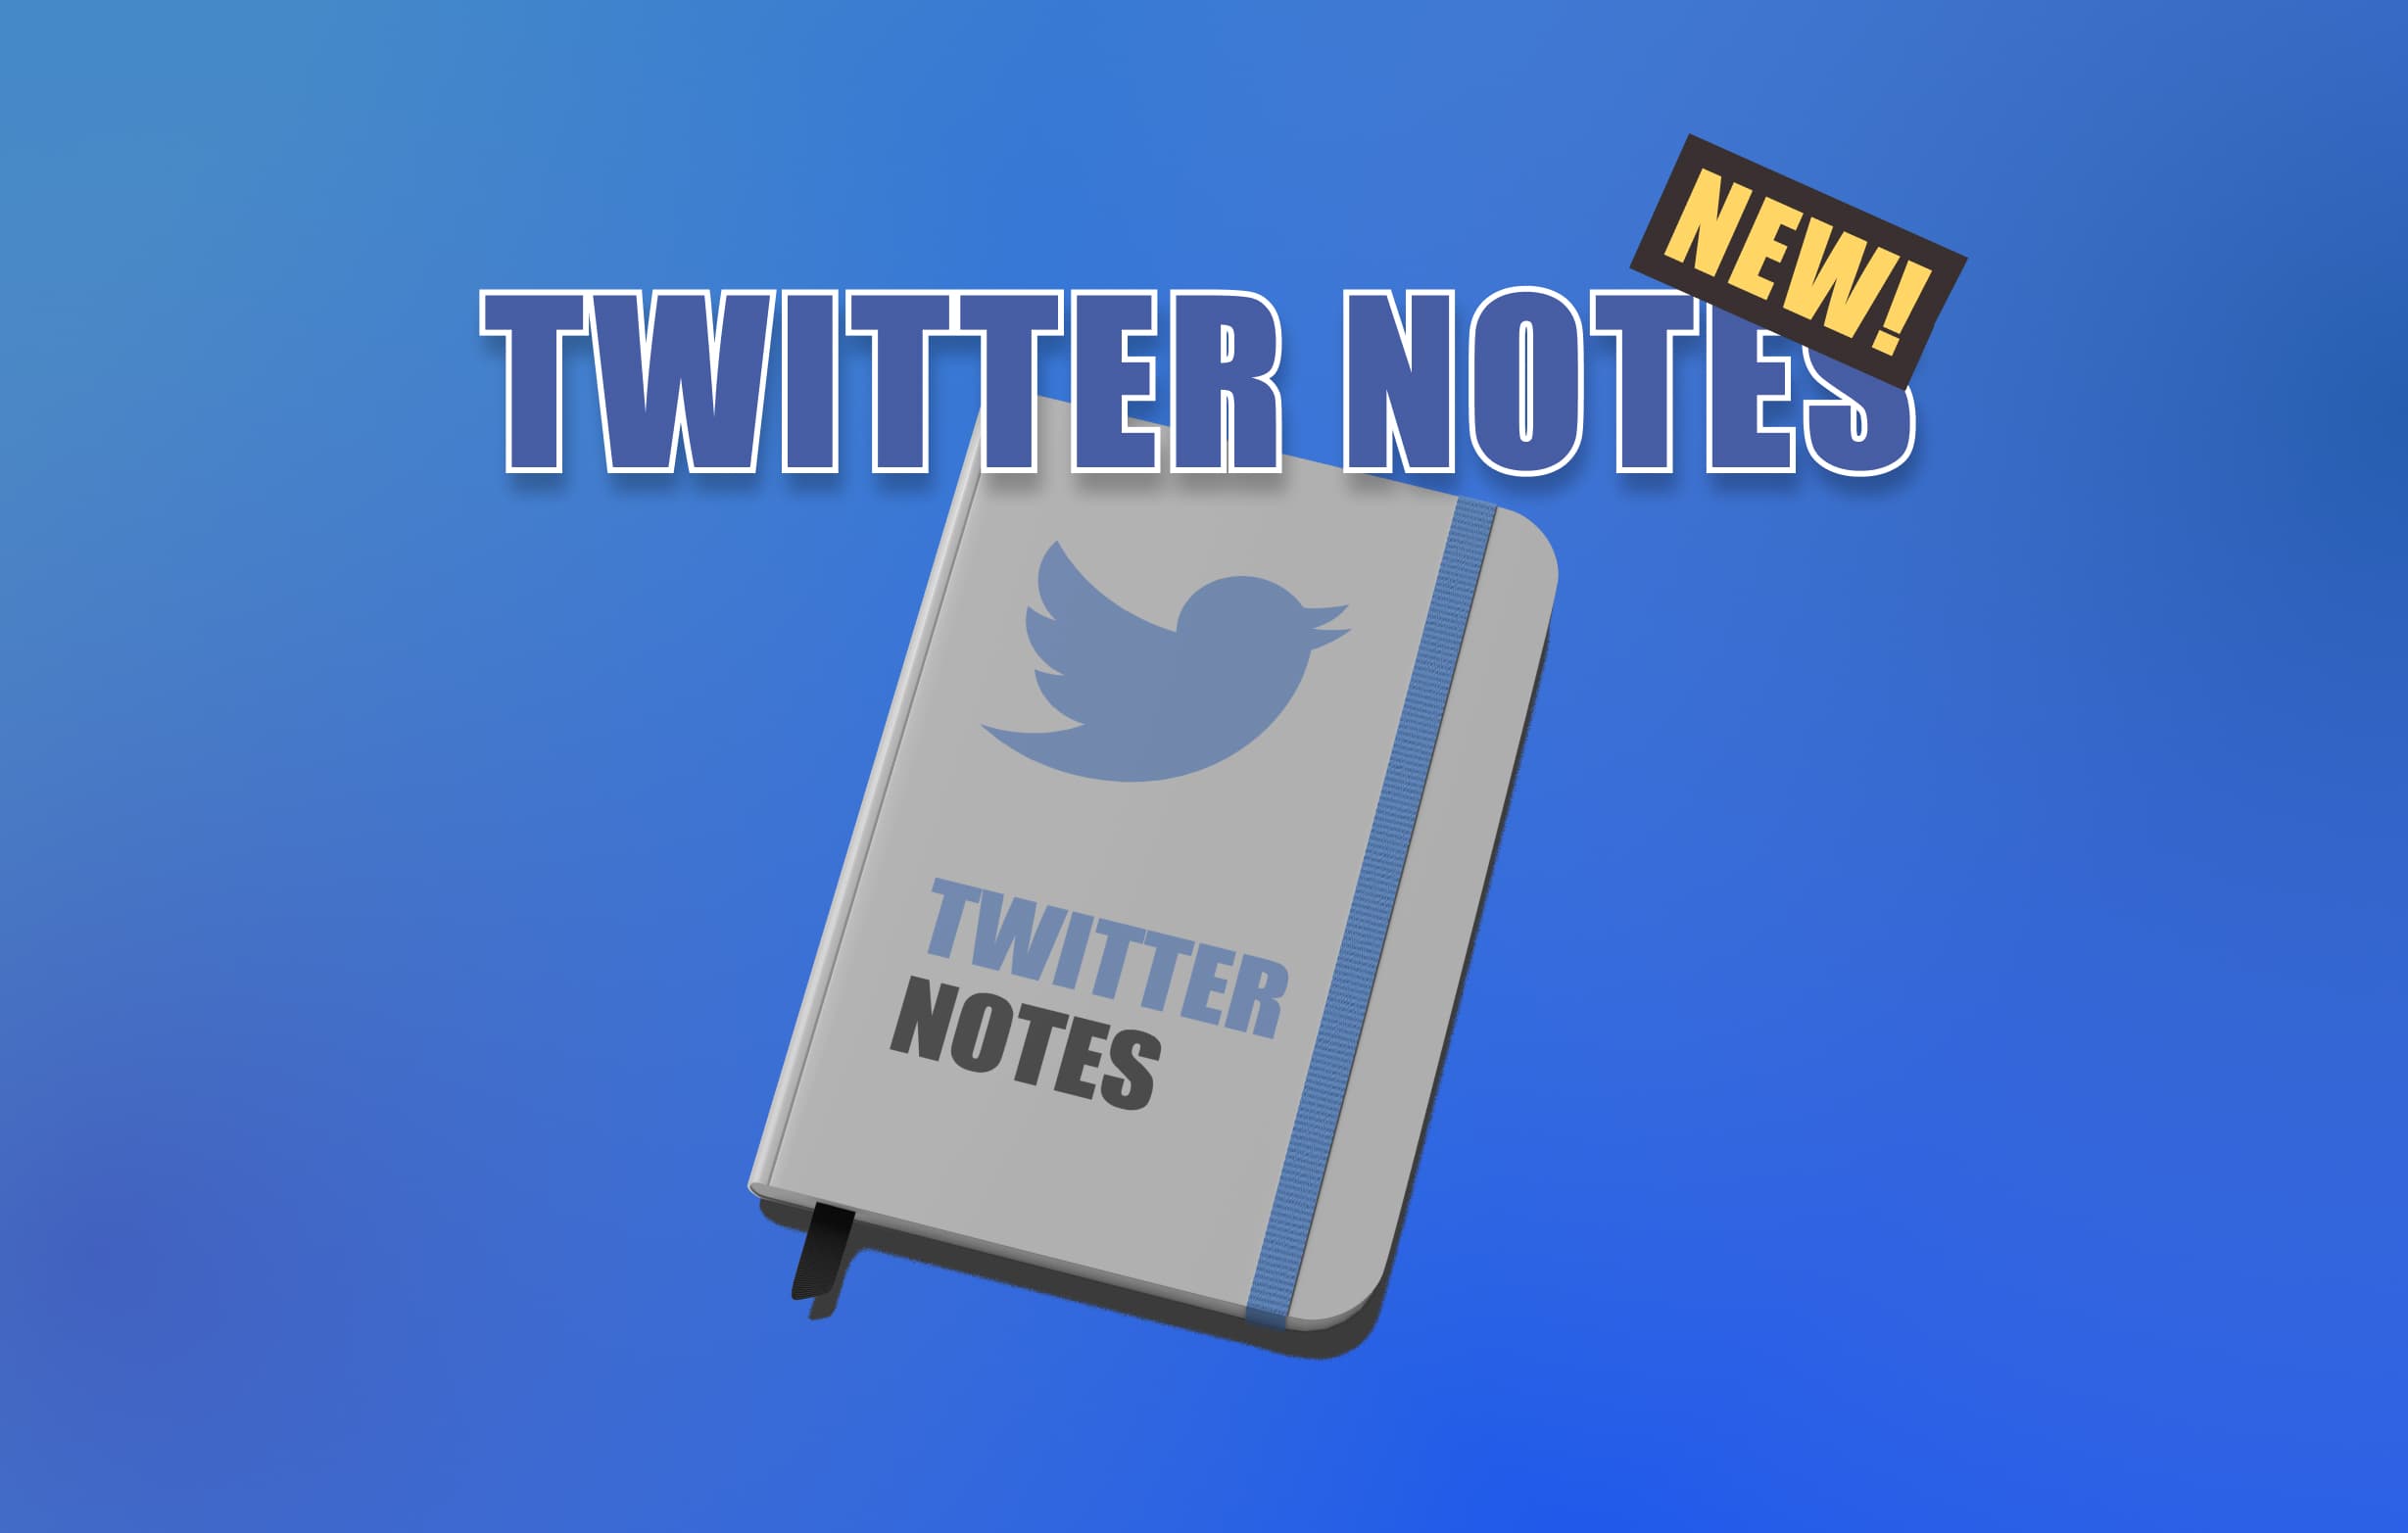 Twitter has publicly released a new post type that allows for long form writing. Twitter Notes allow for long form written essays that include a 100 w